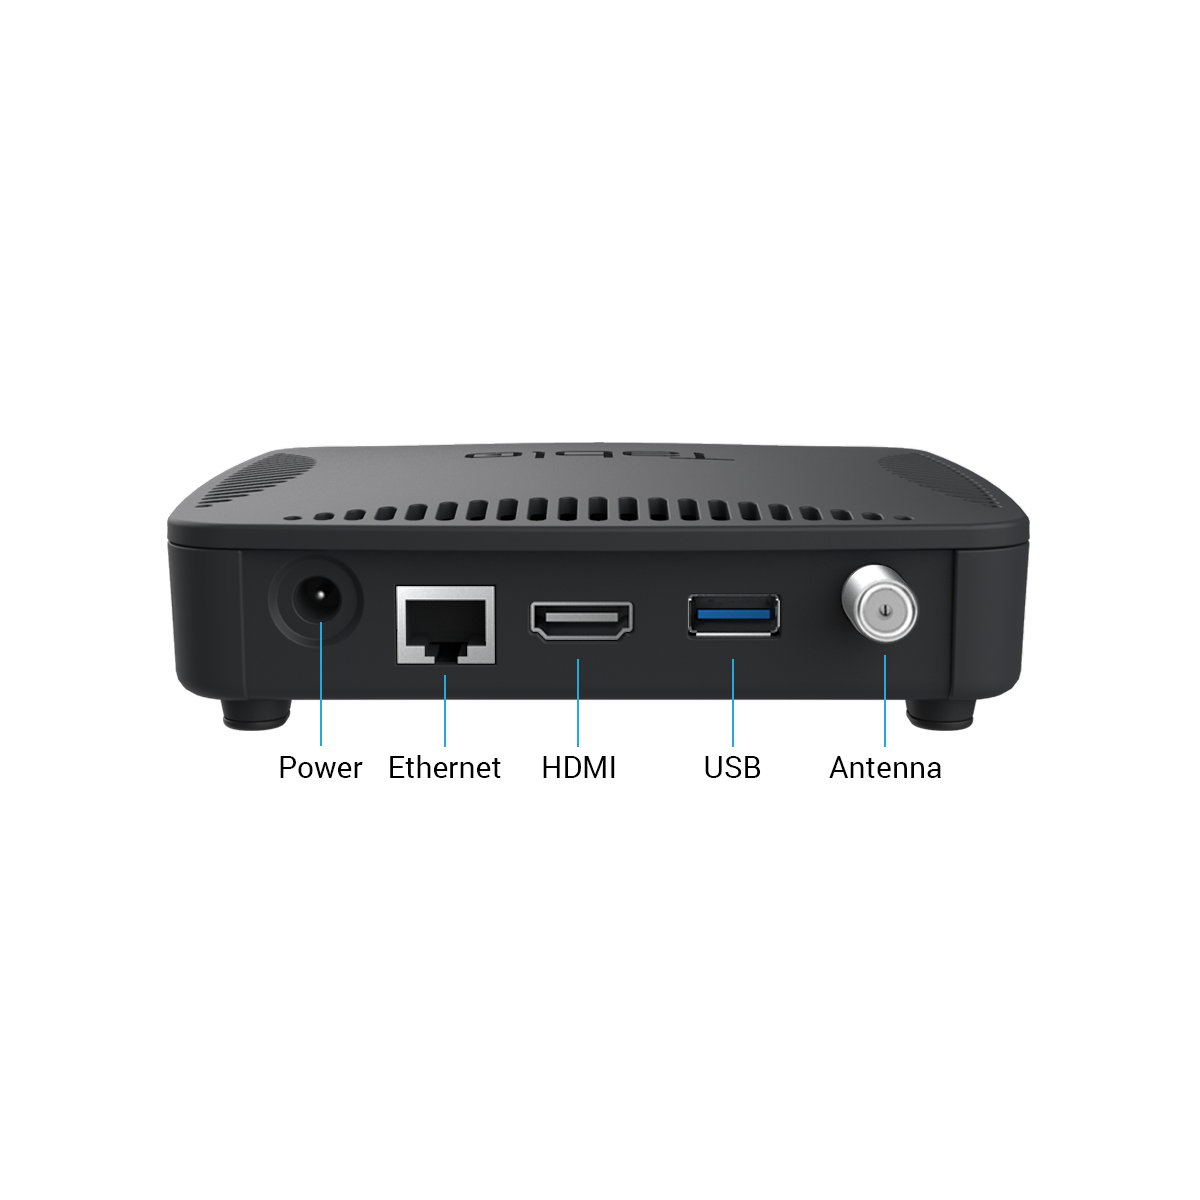 Tablo QUAD HDMI Over-The-Air (OTA) DVR (Digital Video Recorder) for Cord Cutters. DVR hardware rear view with inputs labelled.